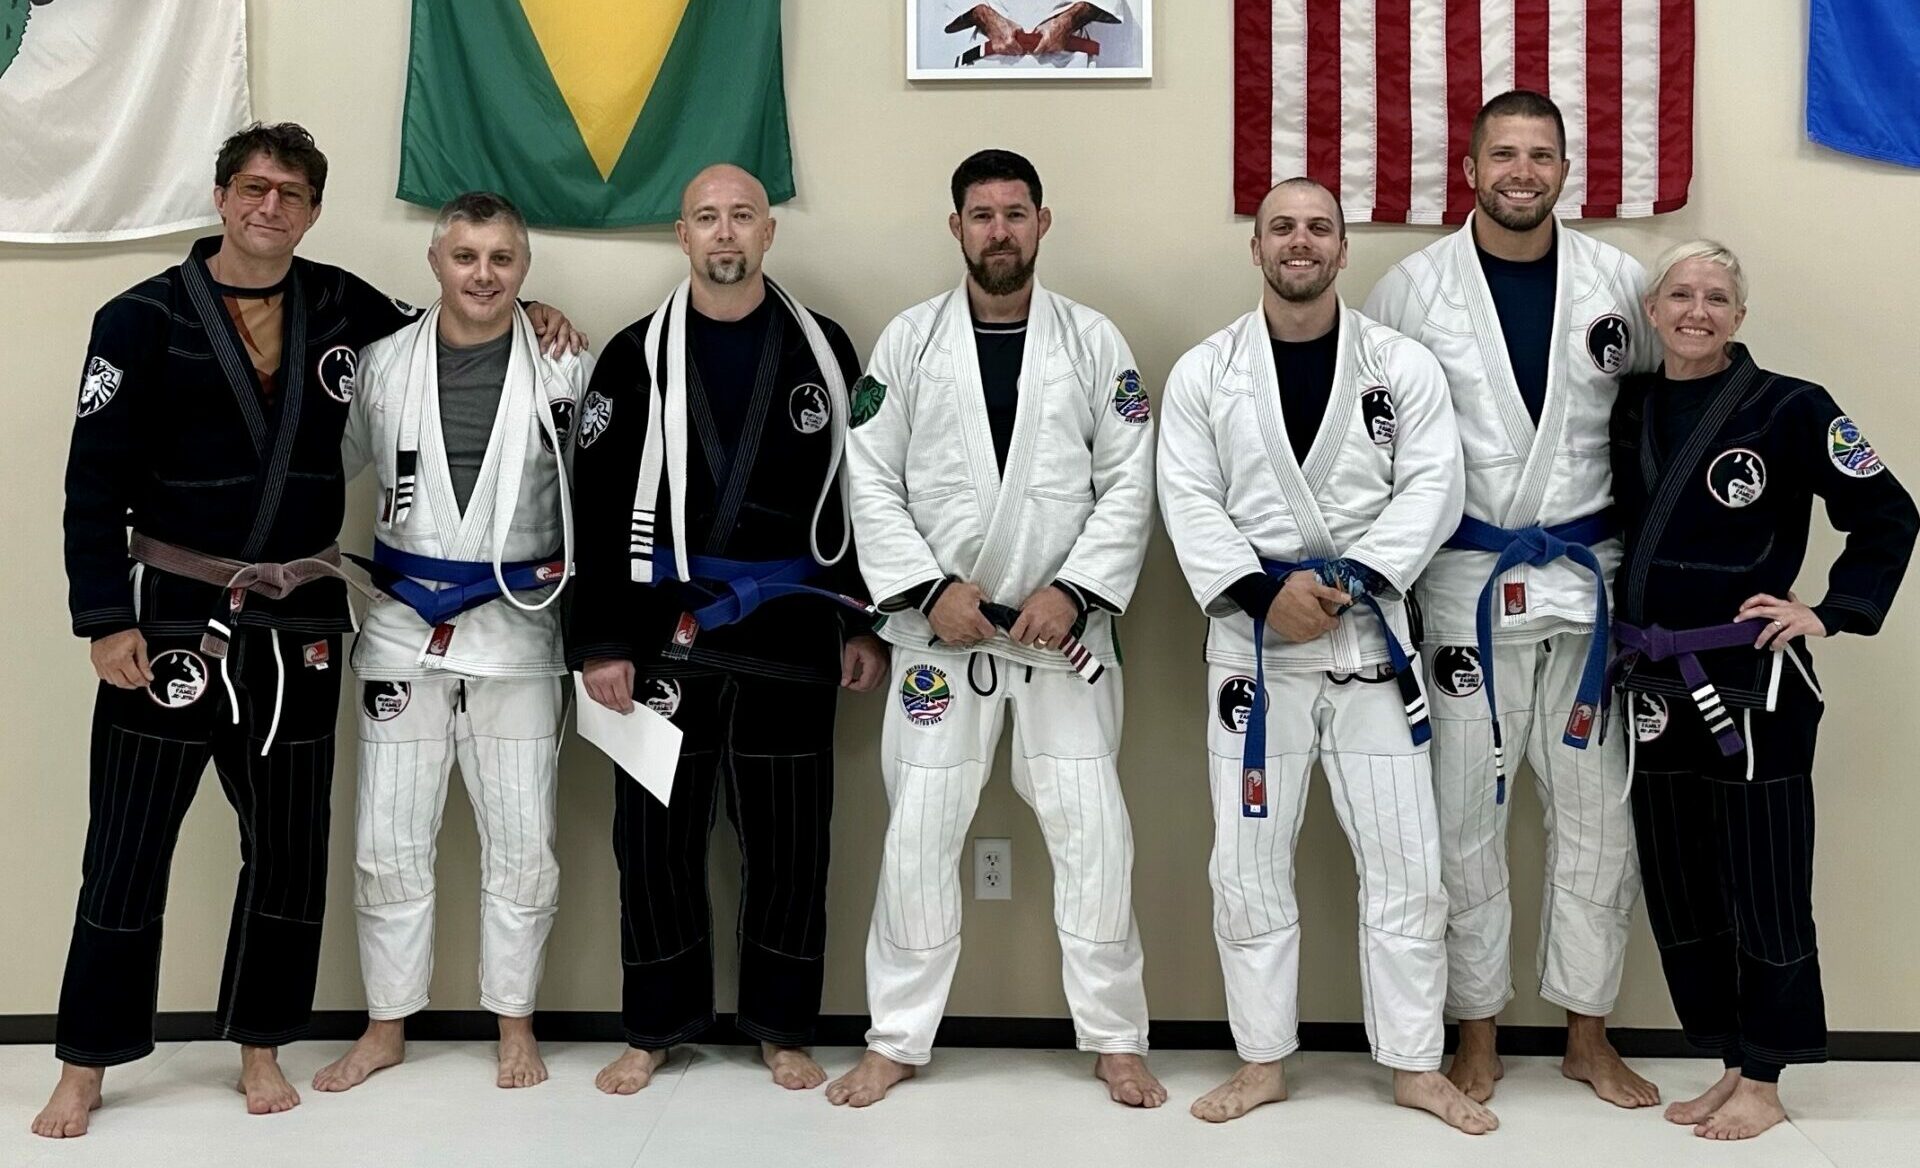 Four Aberdeen police officers were among those honored with blue belts at a Wolfpack Family Jiu-Jitsu ceremony on Sept. 8. From left are Wolfpack Family Jiu-Jitsu coach Joshua Citrak; officer Mark Miller, blue belt; officer Michael Bunke, blue belt; Matheus Colhado, a black belt who presented the belts; officer Zach Krage, blue belt second-degree; officer Kyle Fadness, blue-belt third degree, and Wolfpack Family Jiu-Jitsu coach Susan Citrak. Courtesy photo